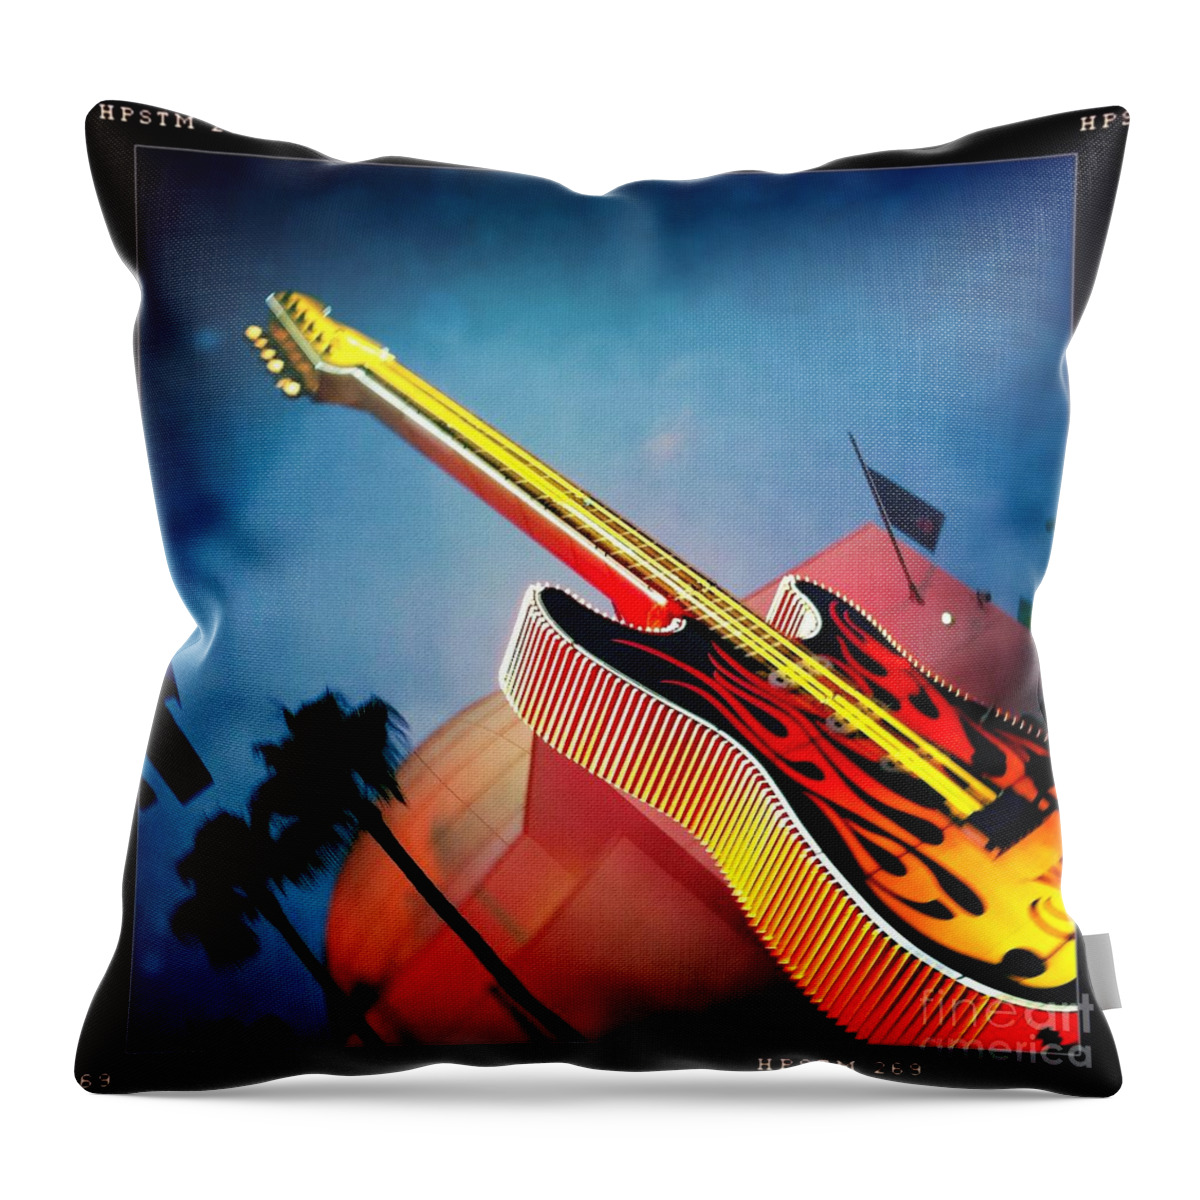 Hard Rock Cafe Throw Pillow featuring the photograph Hard Rock Guitar by Nina Prommer